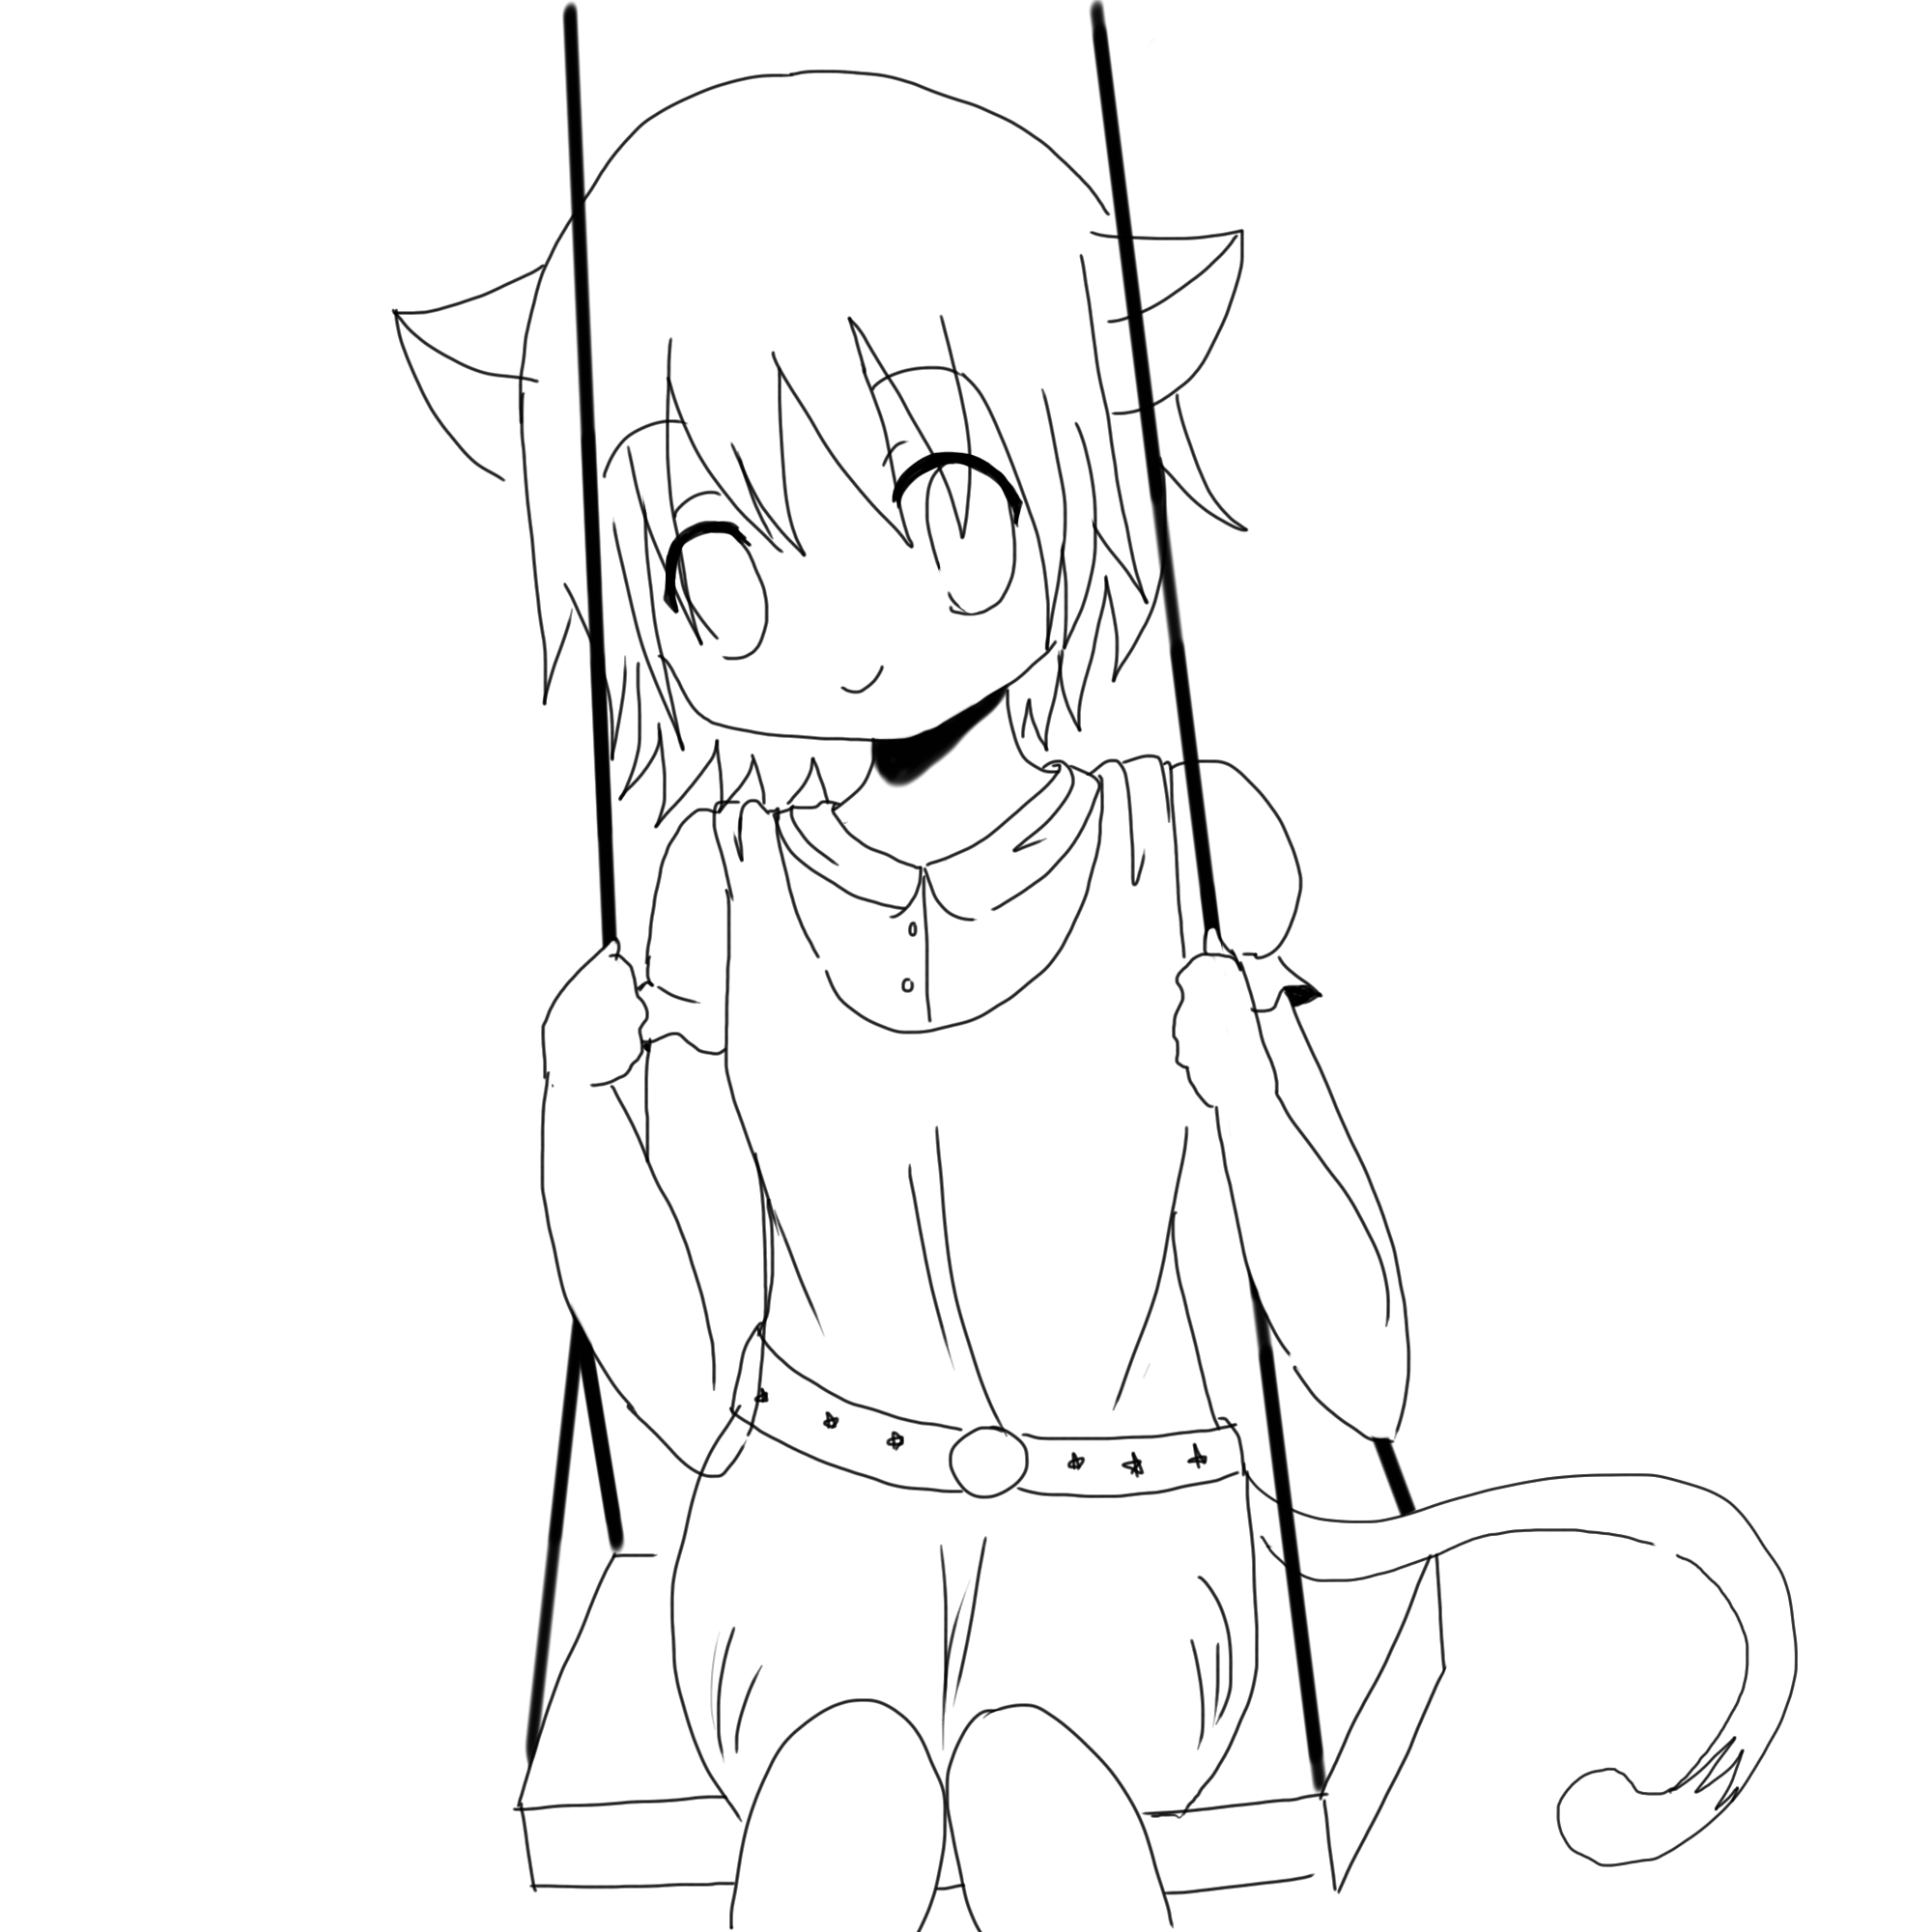 20 Pics Of Anime Cat Girl Warrior Coloring Pages   Anime Warrior ...